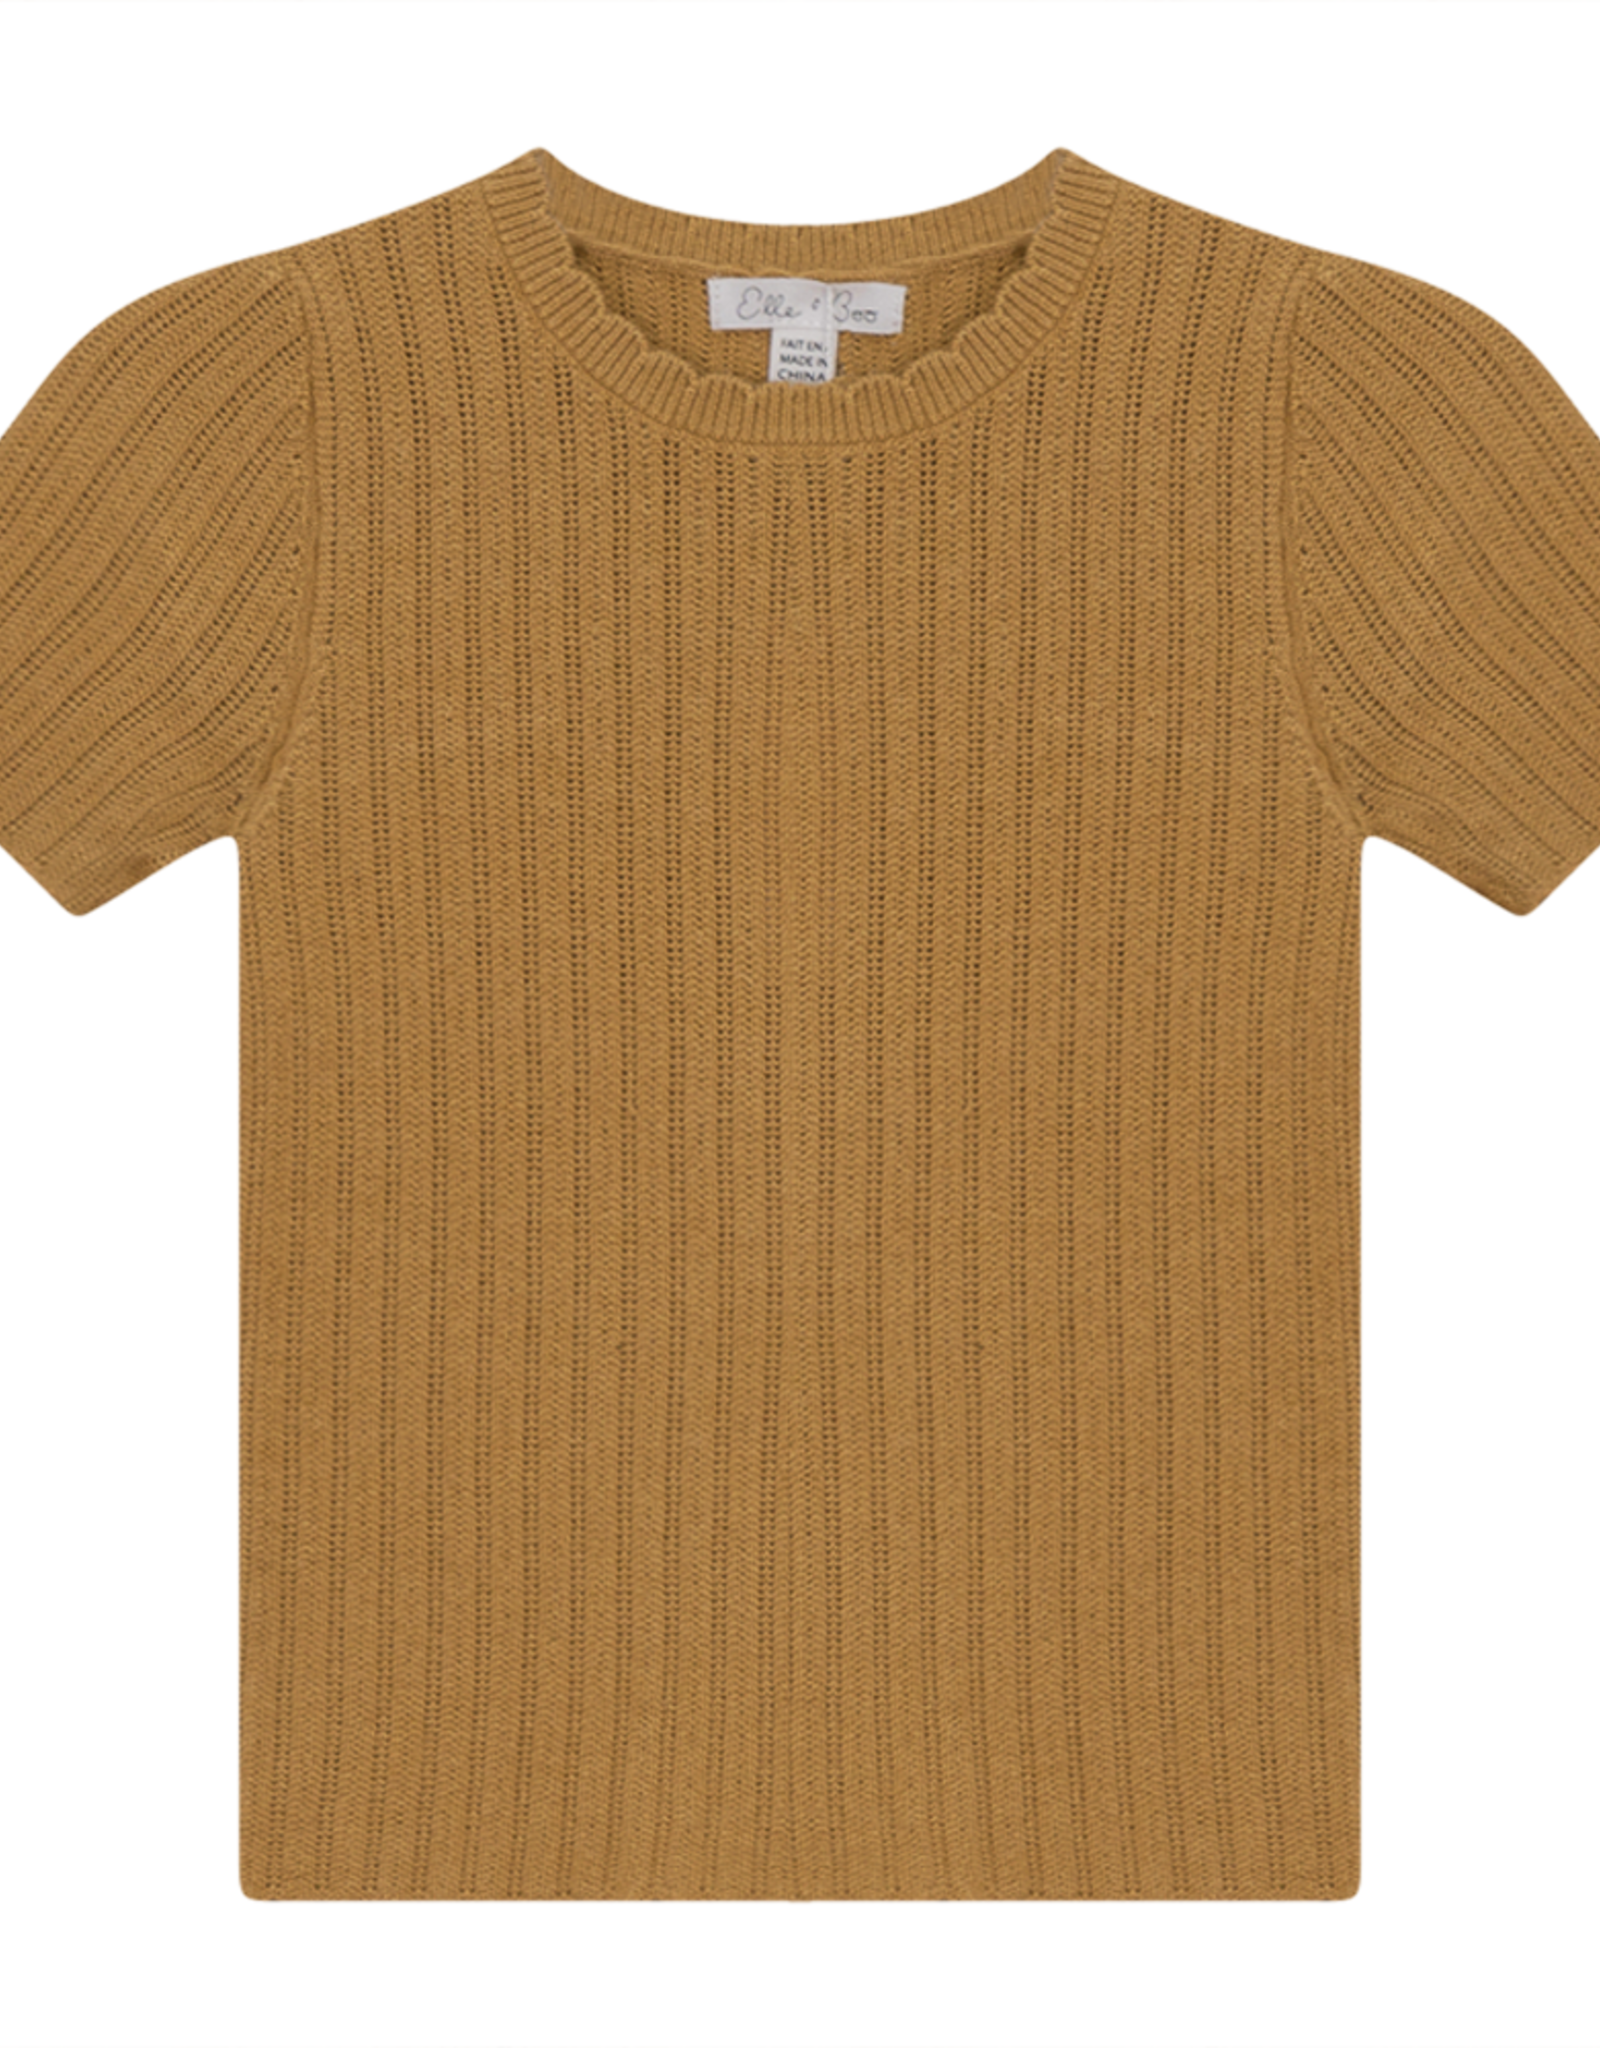 Elle & Boo Elle & Boo Crew Neck Ribbed Top with Scalloped Edging